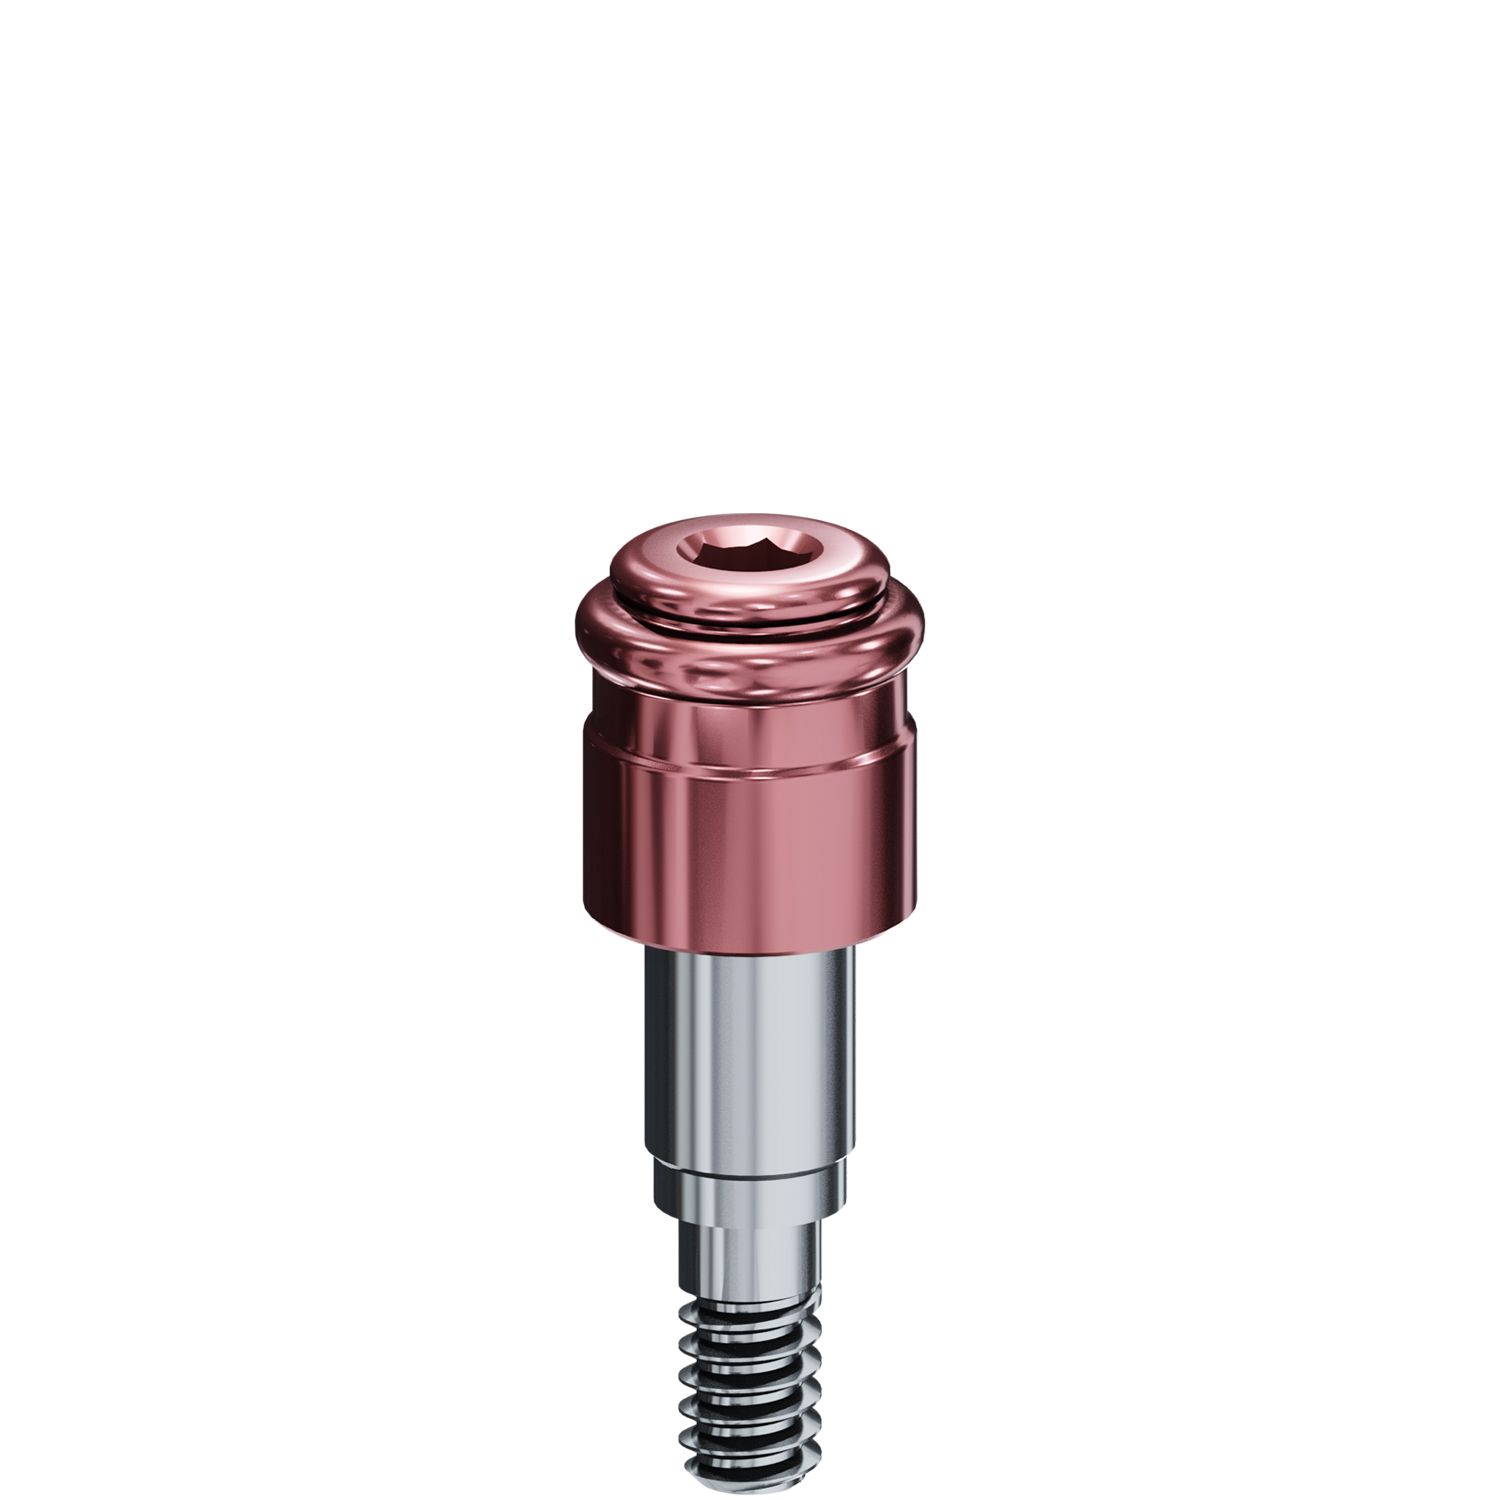 R-Tx Attachment System - 3.4mm Biomet 3i® Certain Connection - 048" Drive - 2.0mm